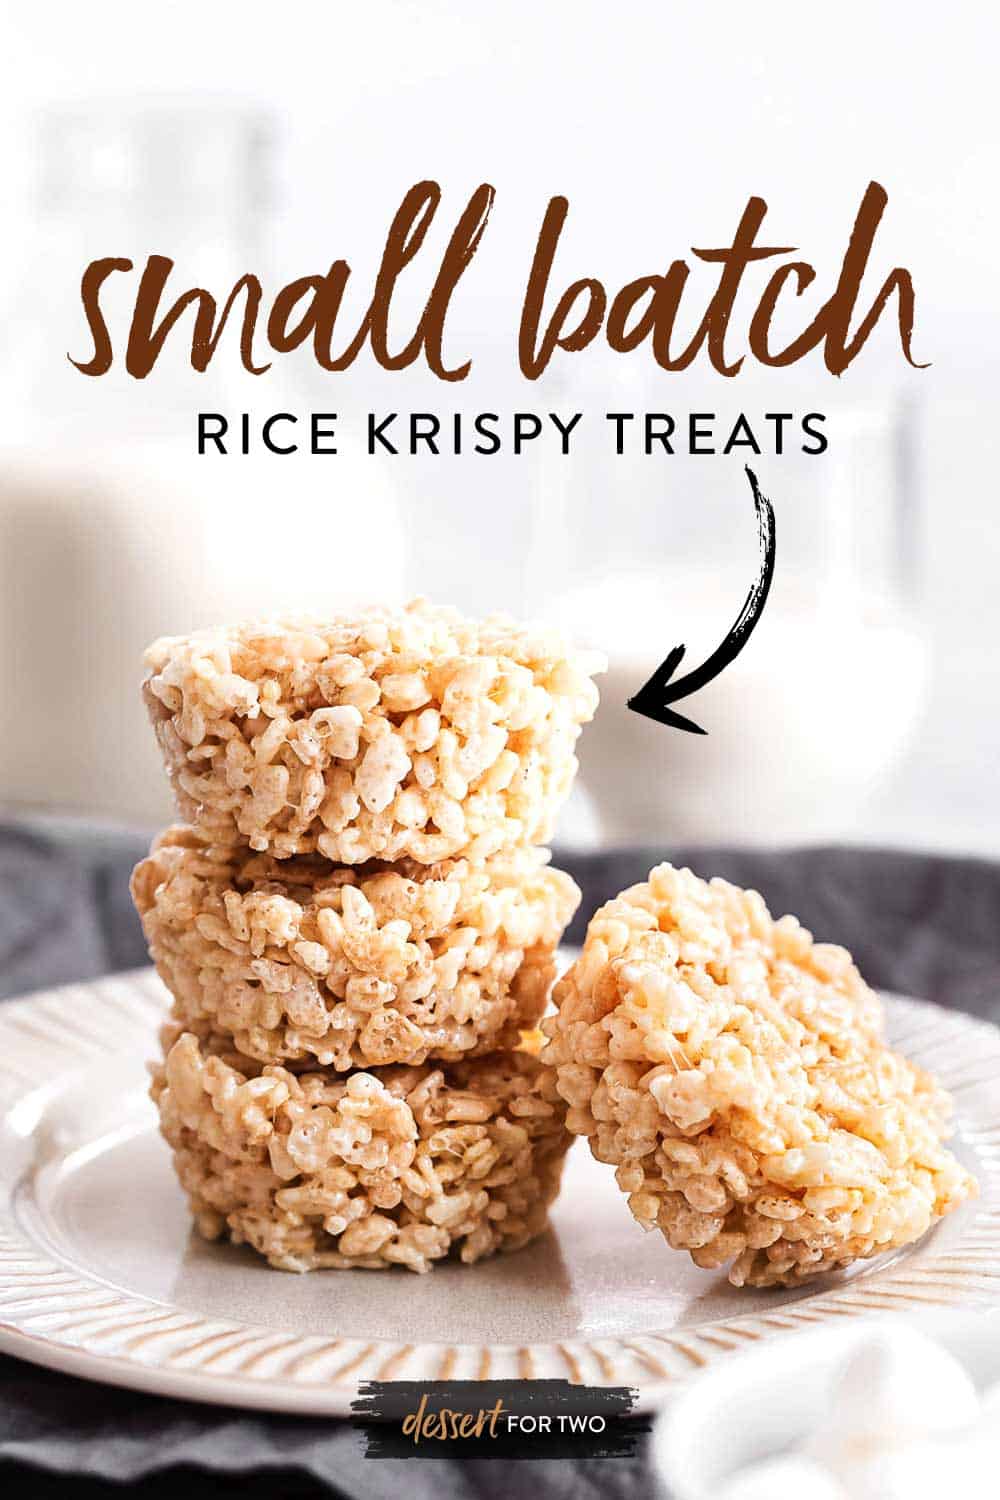 Small Batch Rice Krispie Treats (in a muffin pan) - Dessert for Two